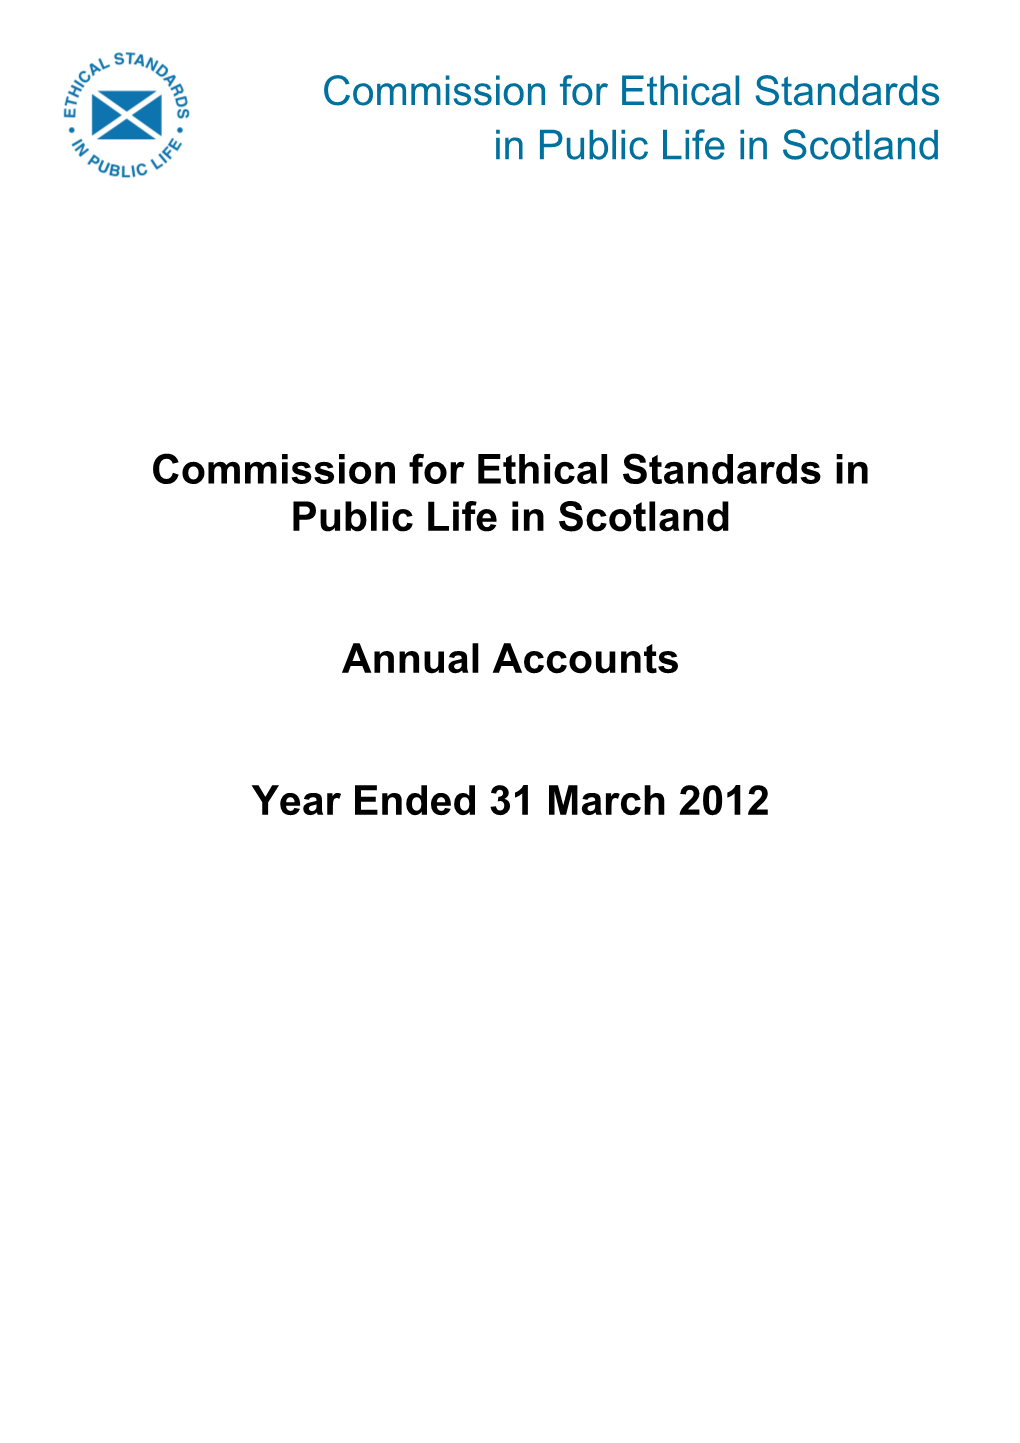 Commission for Ethical Standards in Public Life in Scotland